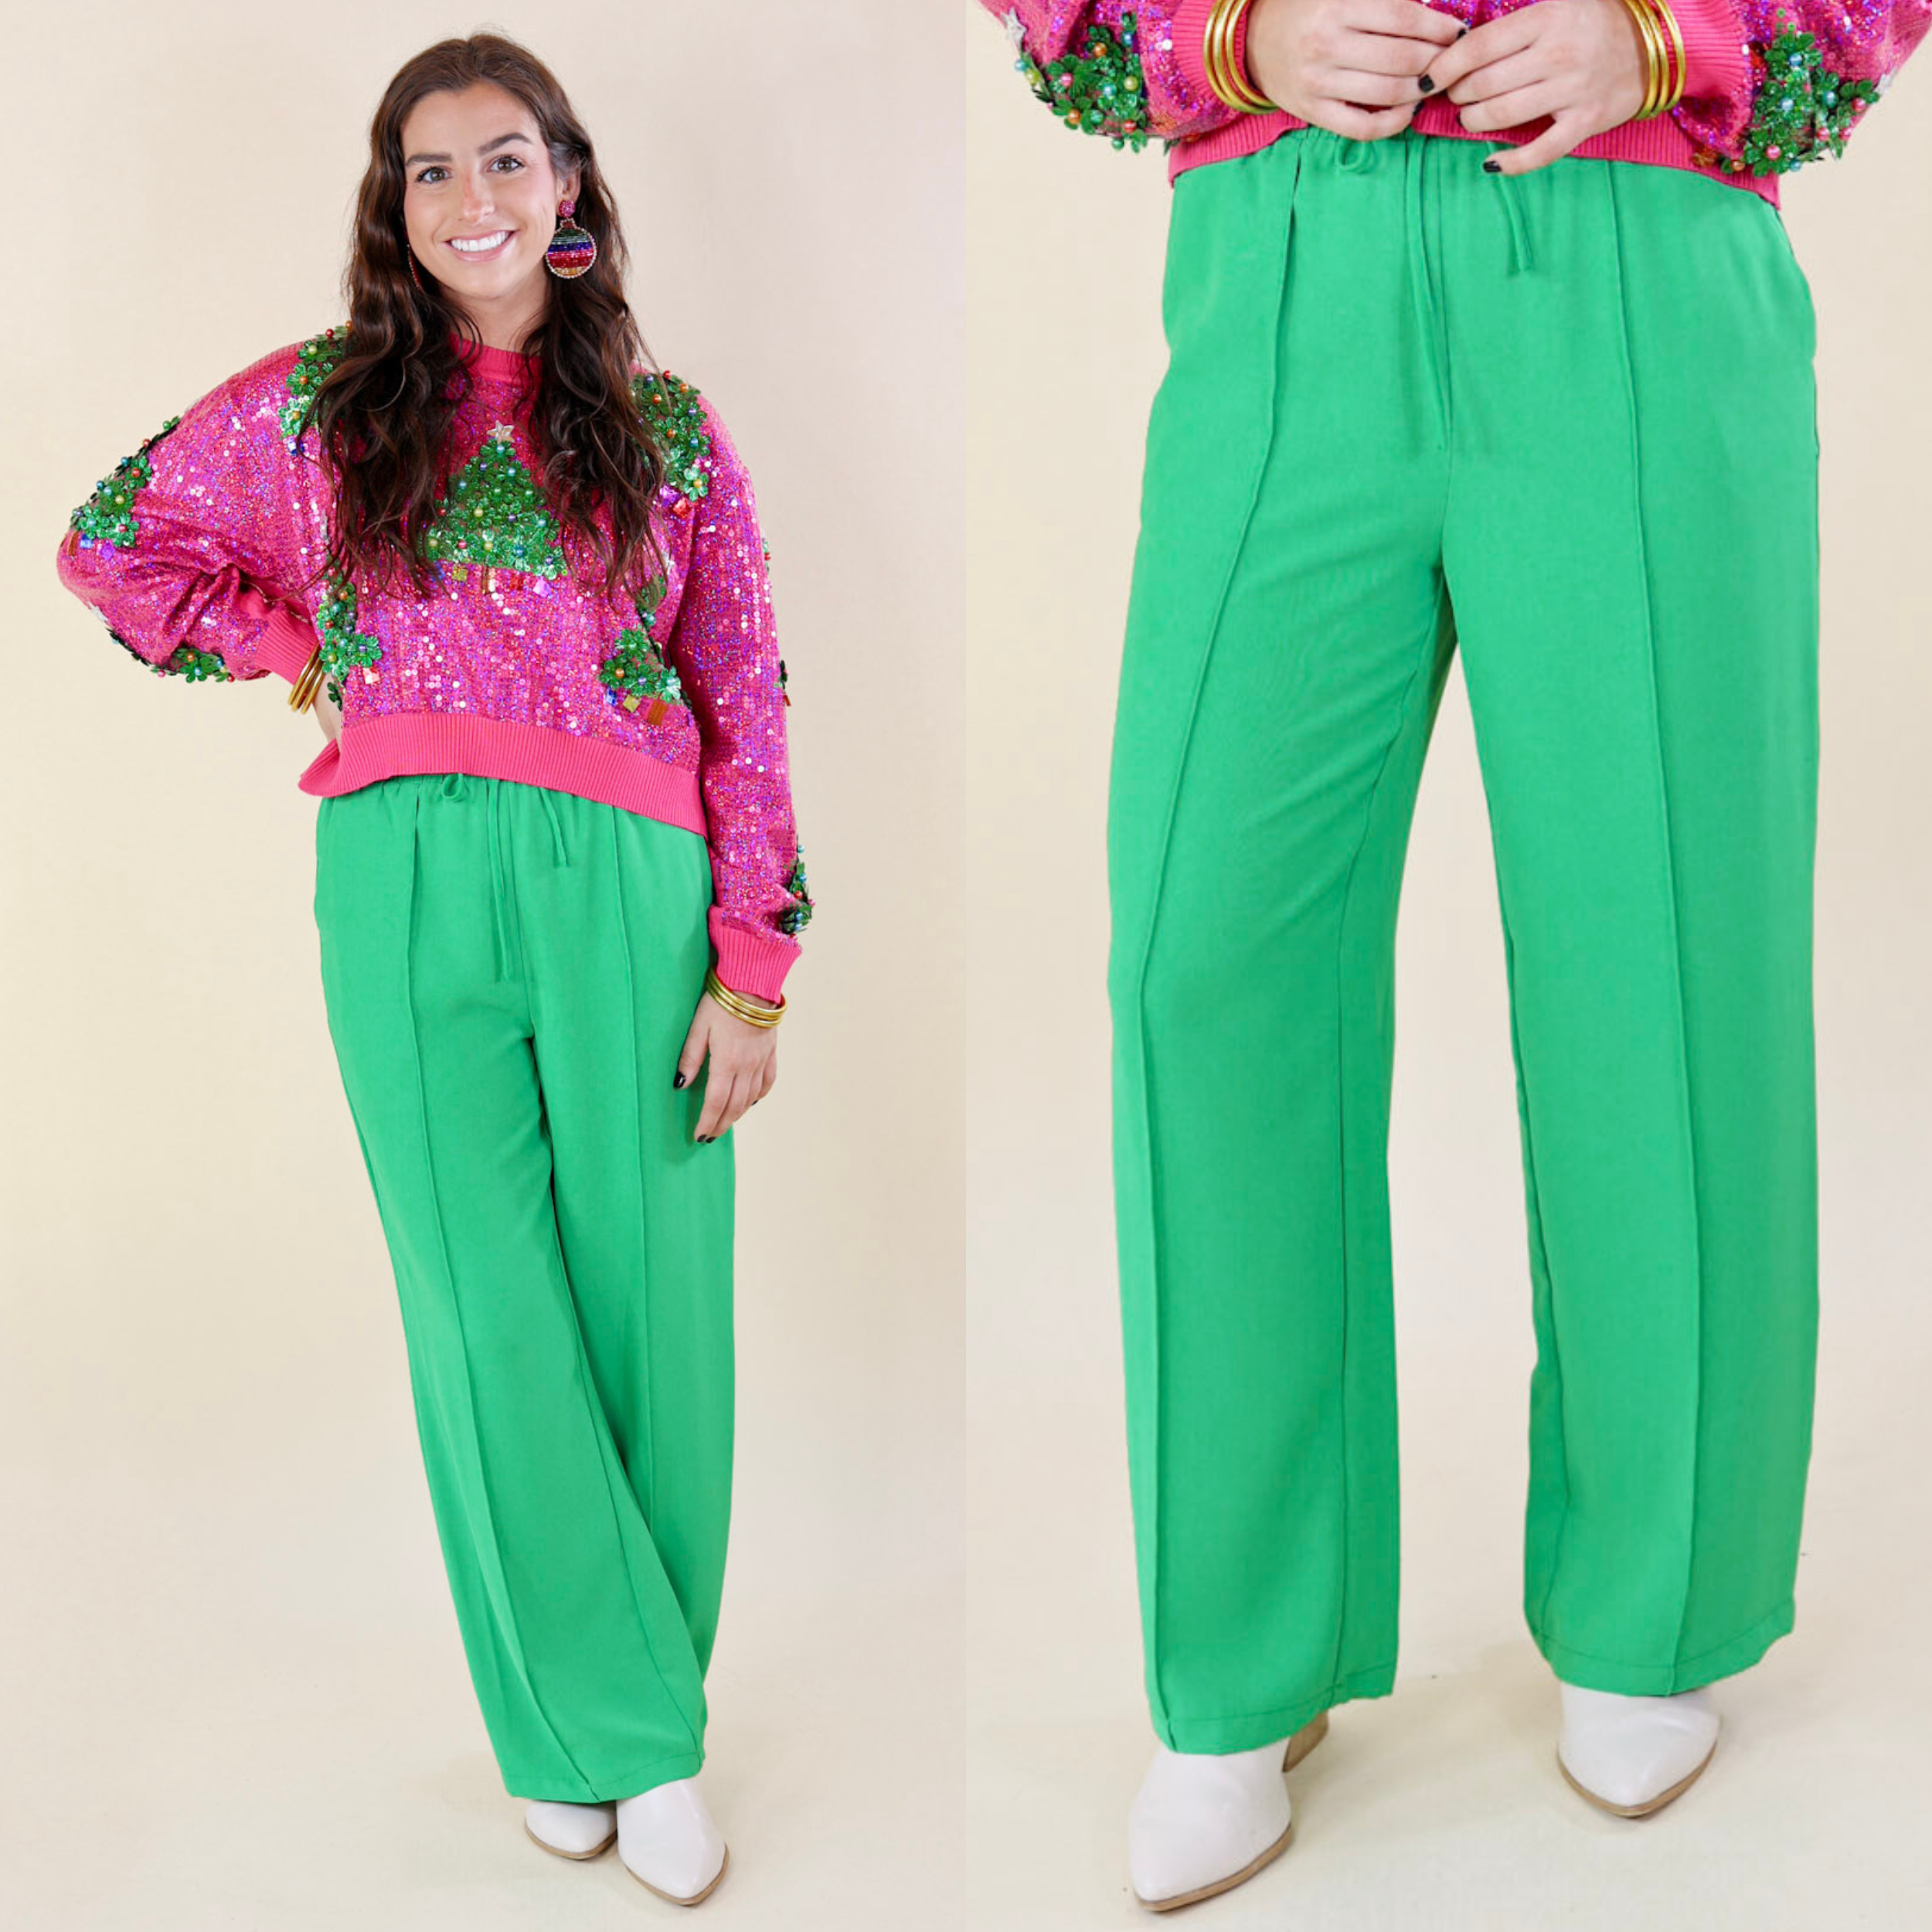 Bossy Business Drawstring Trouser Pants with Pockets in Green - Giddy Up Glamour Boutique